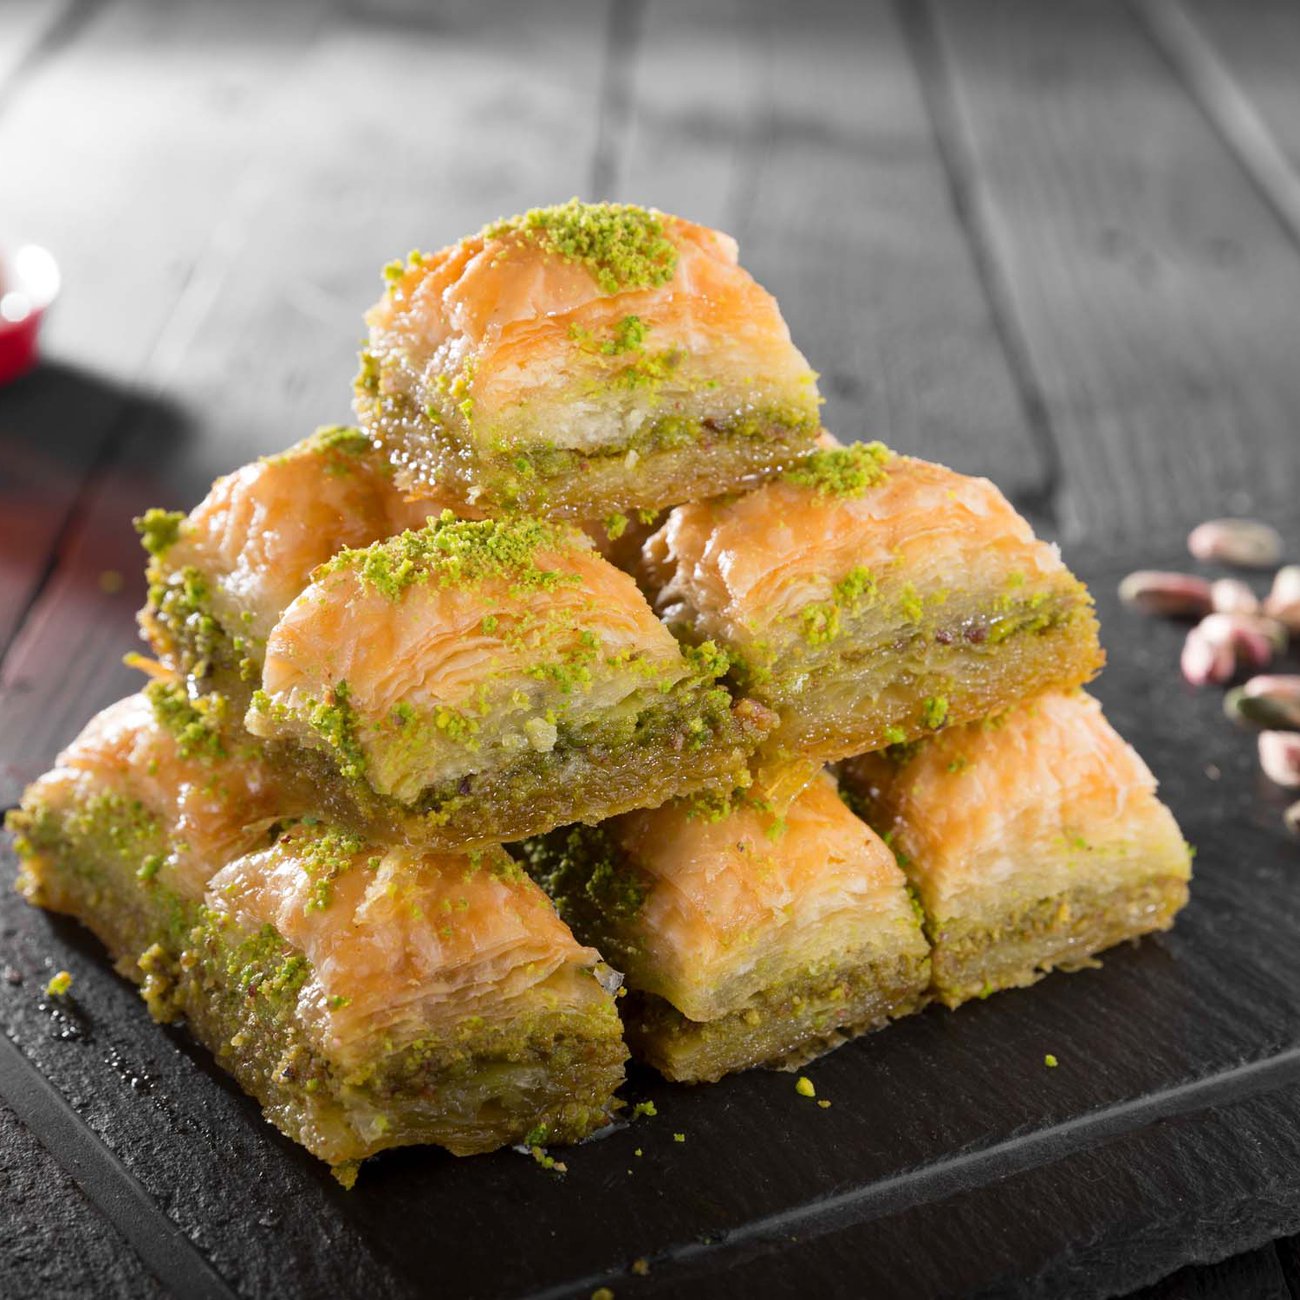 Layers of flaky filo pastry give baklava its crunch